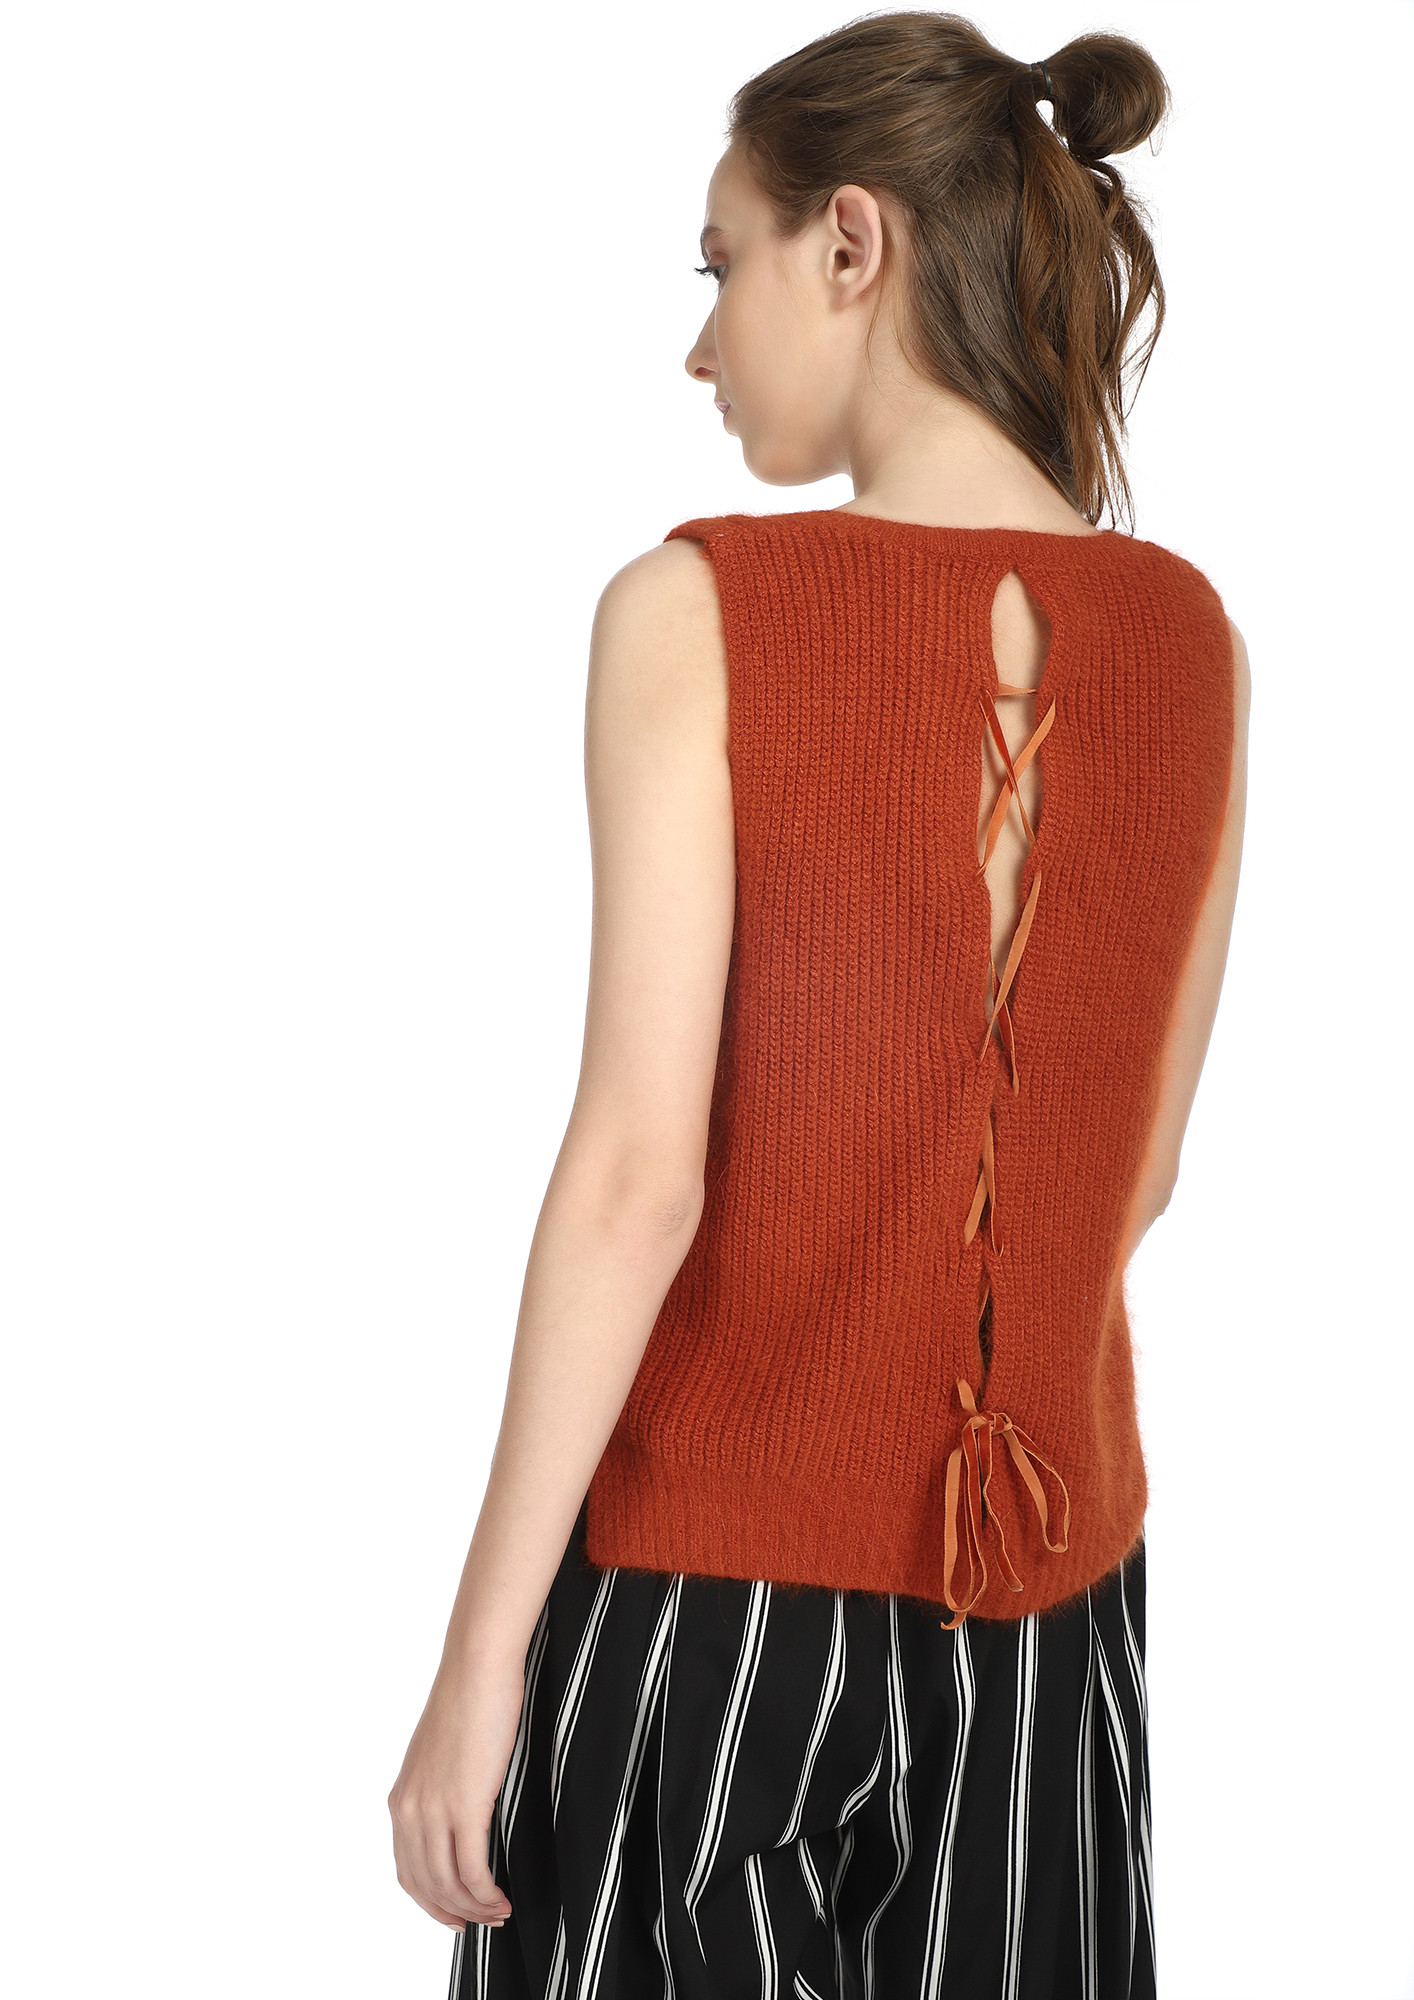 Play It Cool Brick Red Vest Top